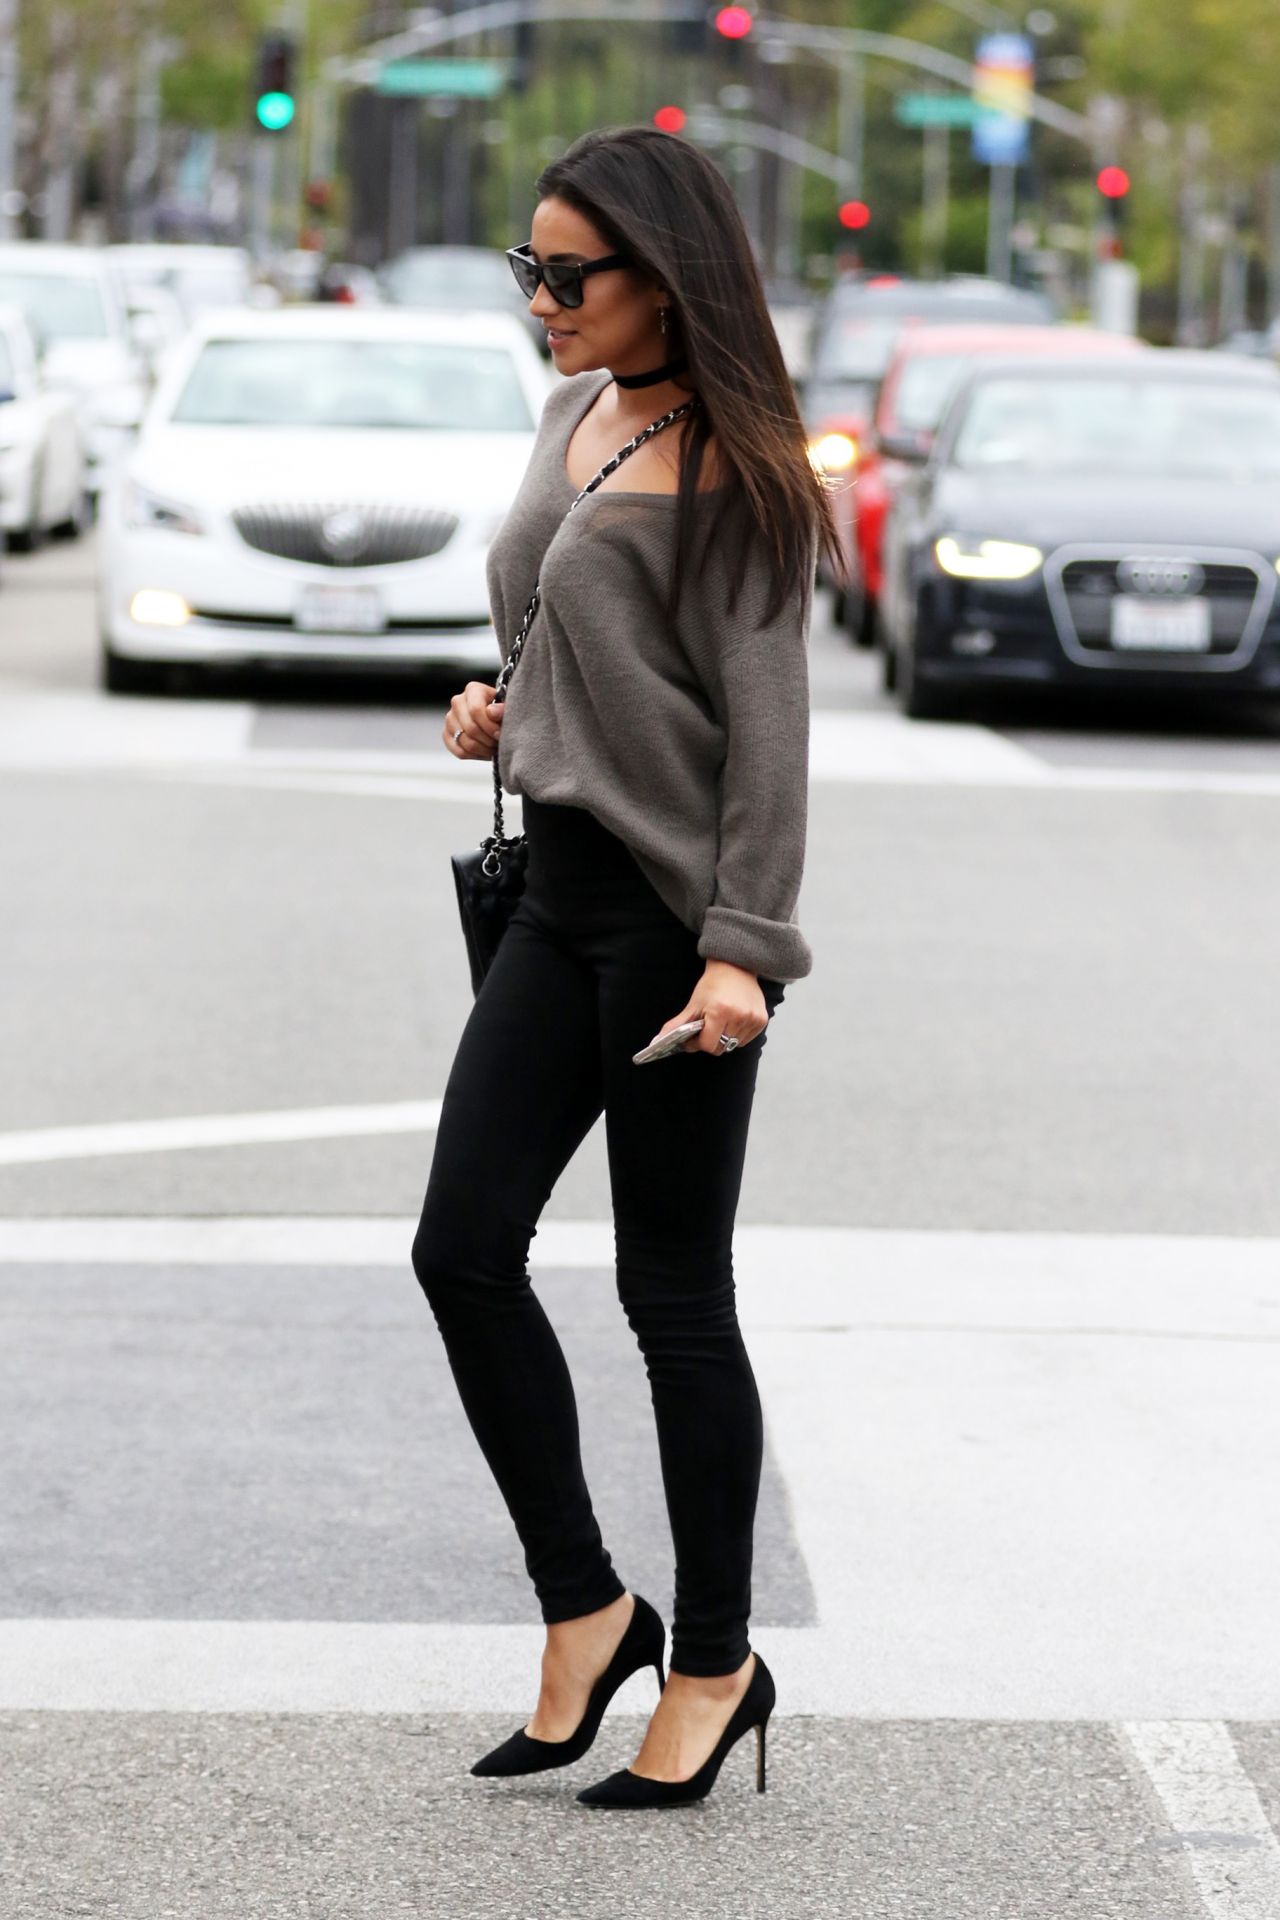 Shay Mitchell Spring Outfit Ideas - Il Pastaio in Beverly Hills 5/7 ...